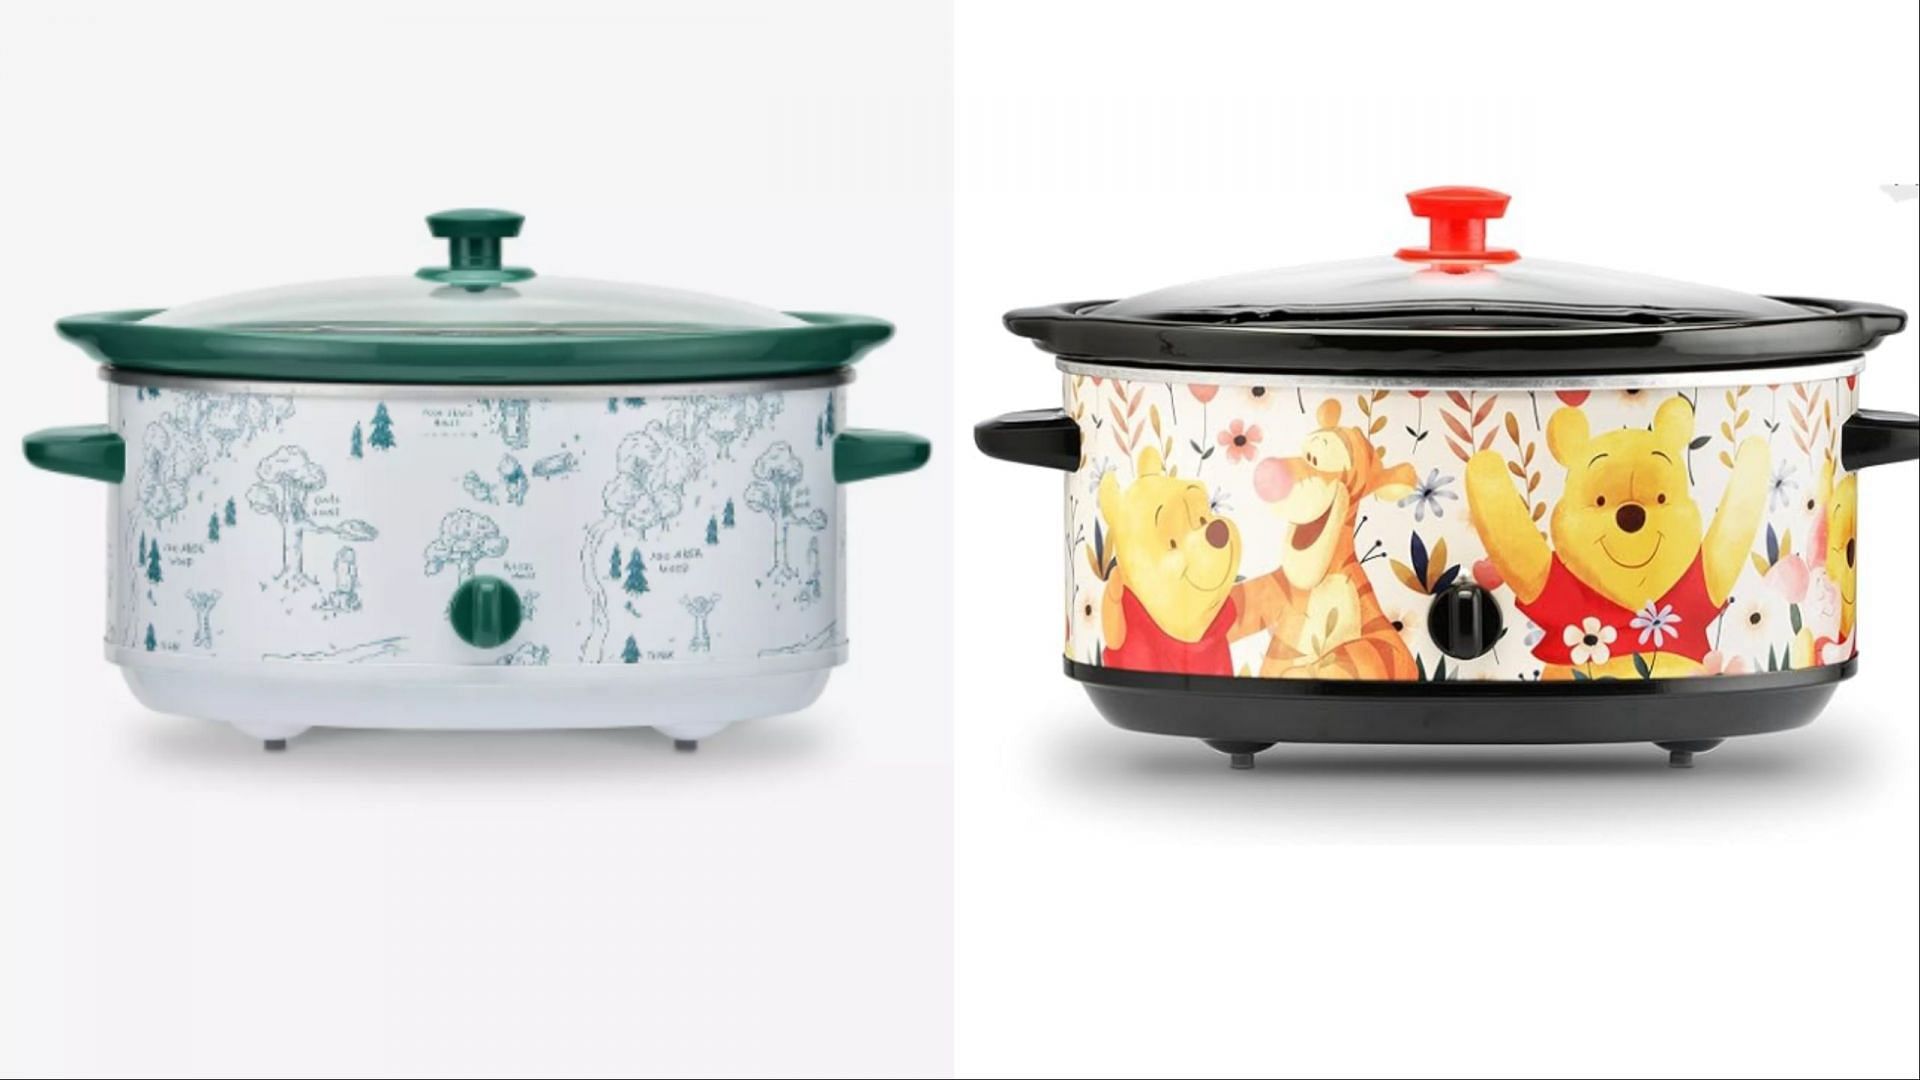 Disney crockpots available in stores (Image via Amazon and Box Lunch)